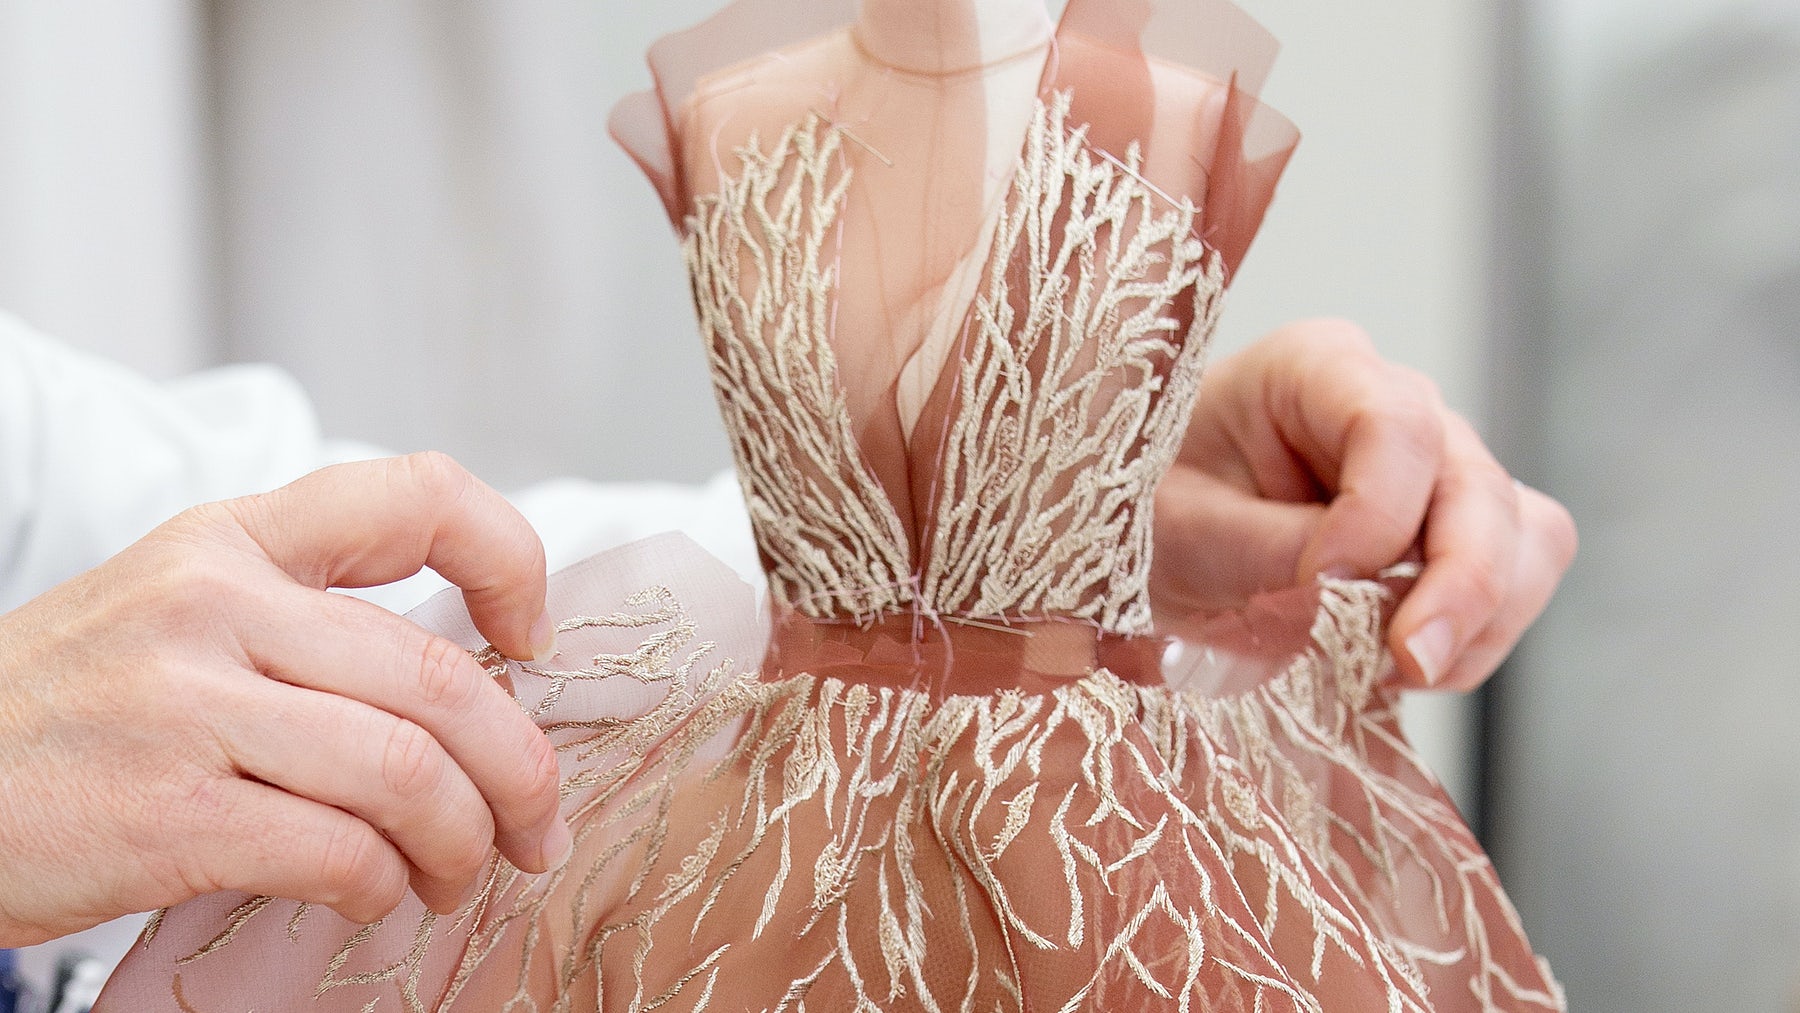 Brand Access featuring Christian Dior Couture, A Behind the